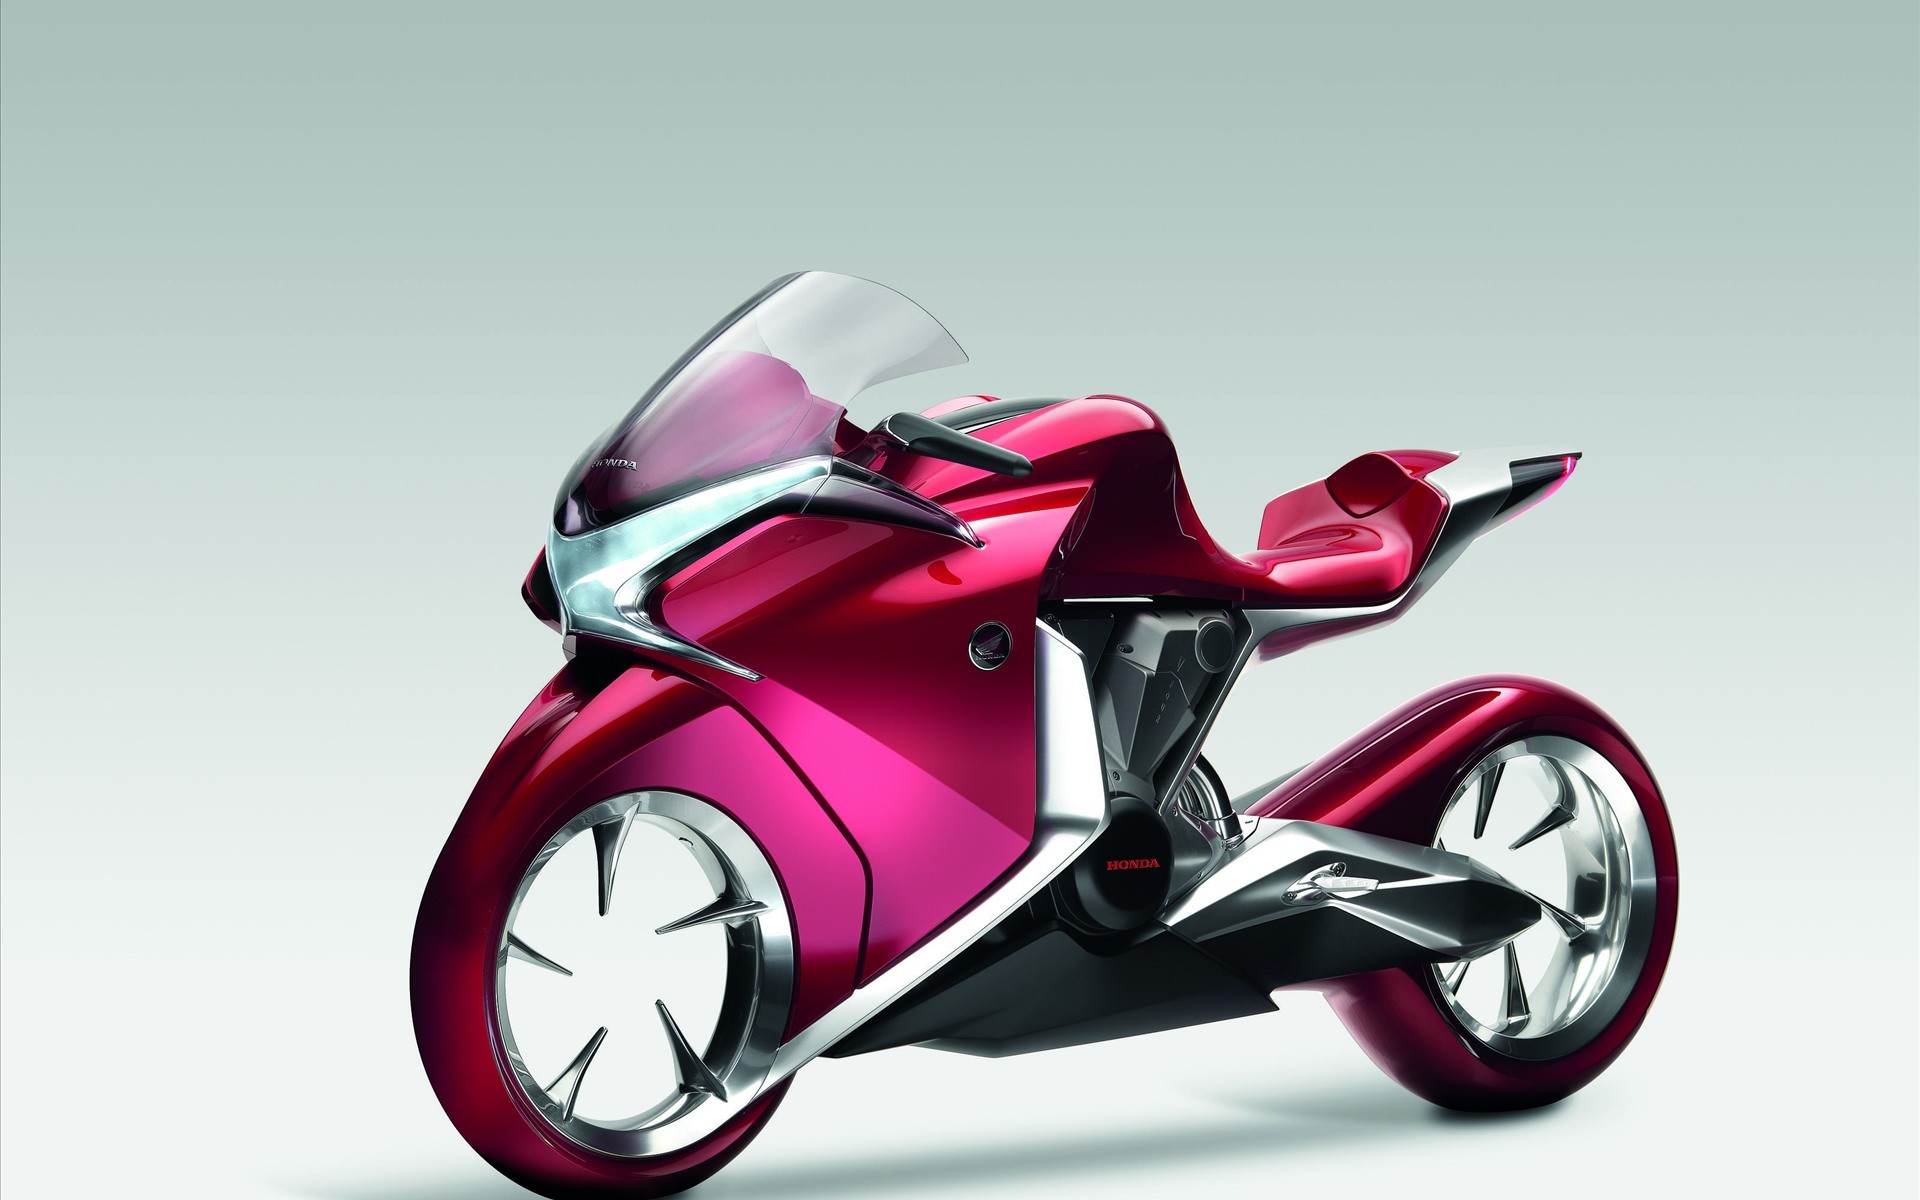 Honda Future Motorcycle The Honda Concept motorcycle gives us an idea of what the future holds for this vehicle maker. By the time this hits the market,